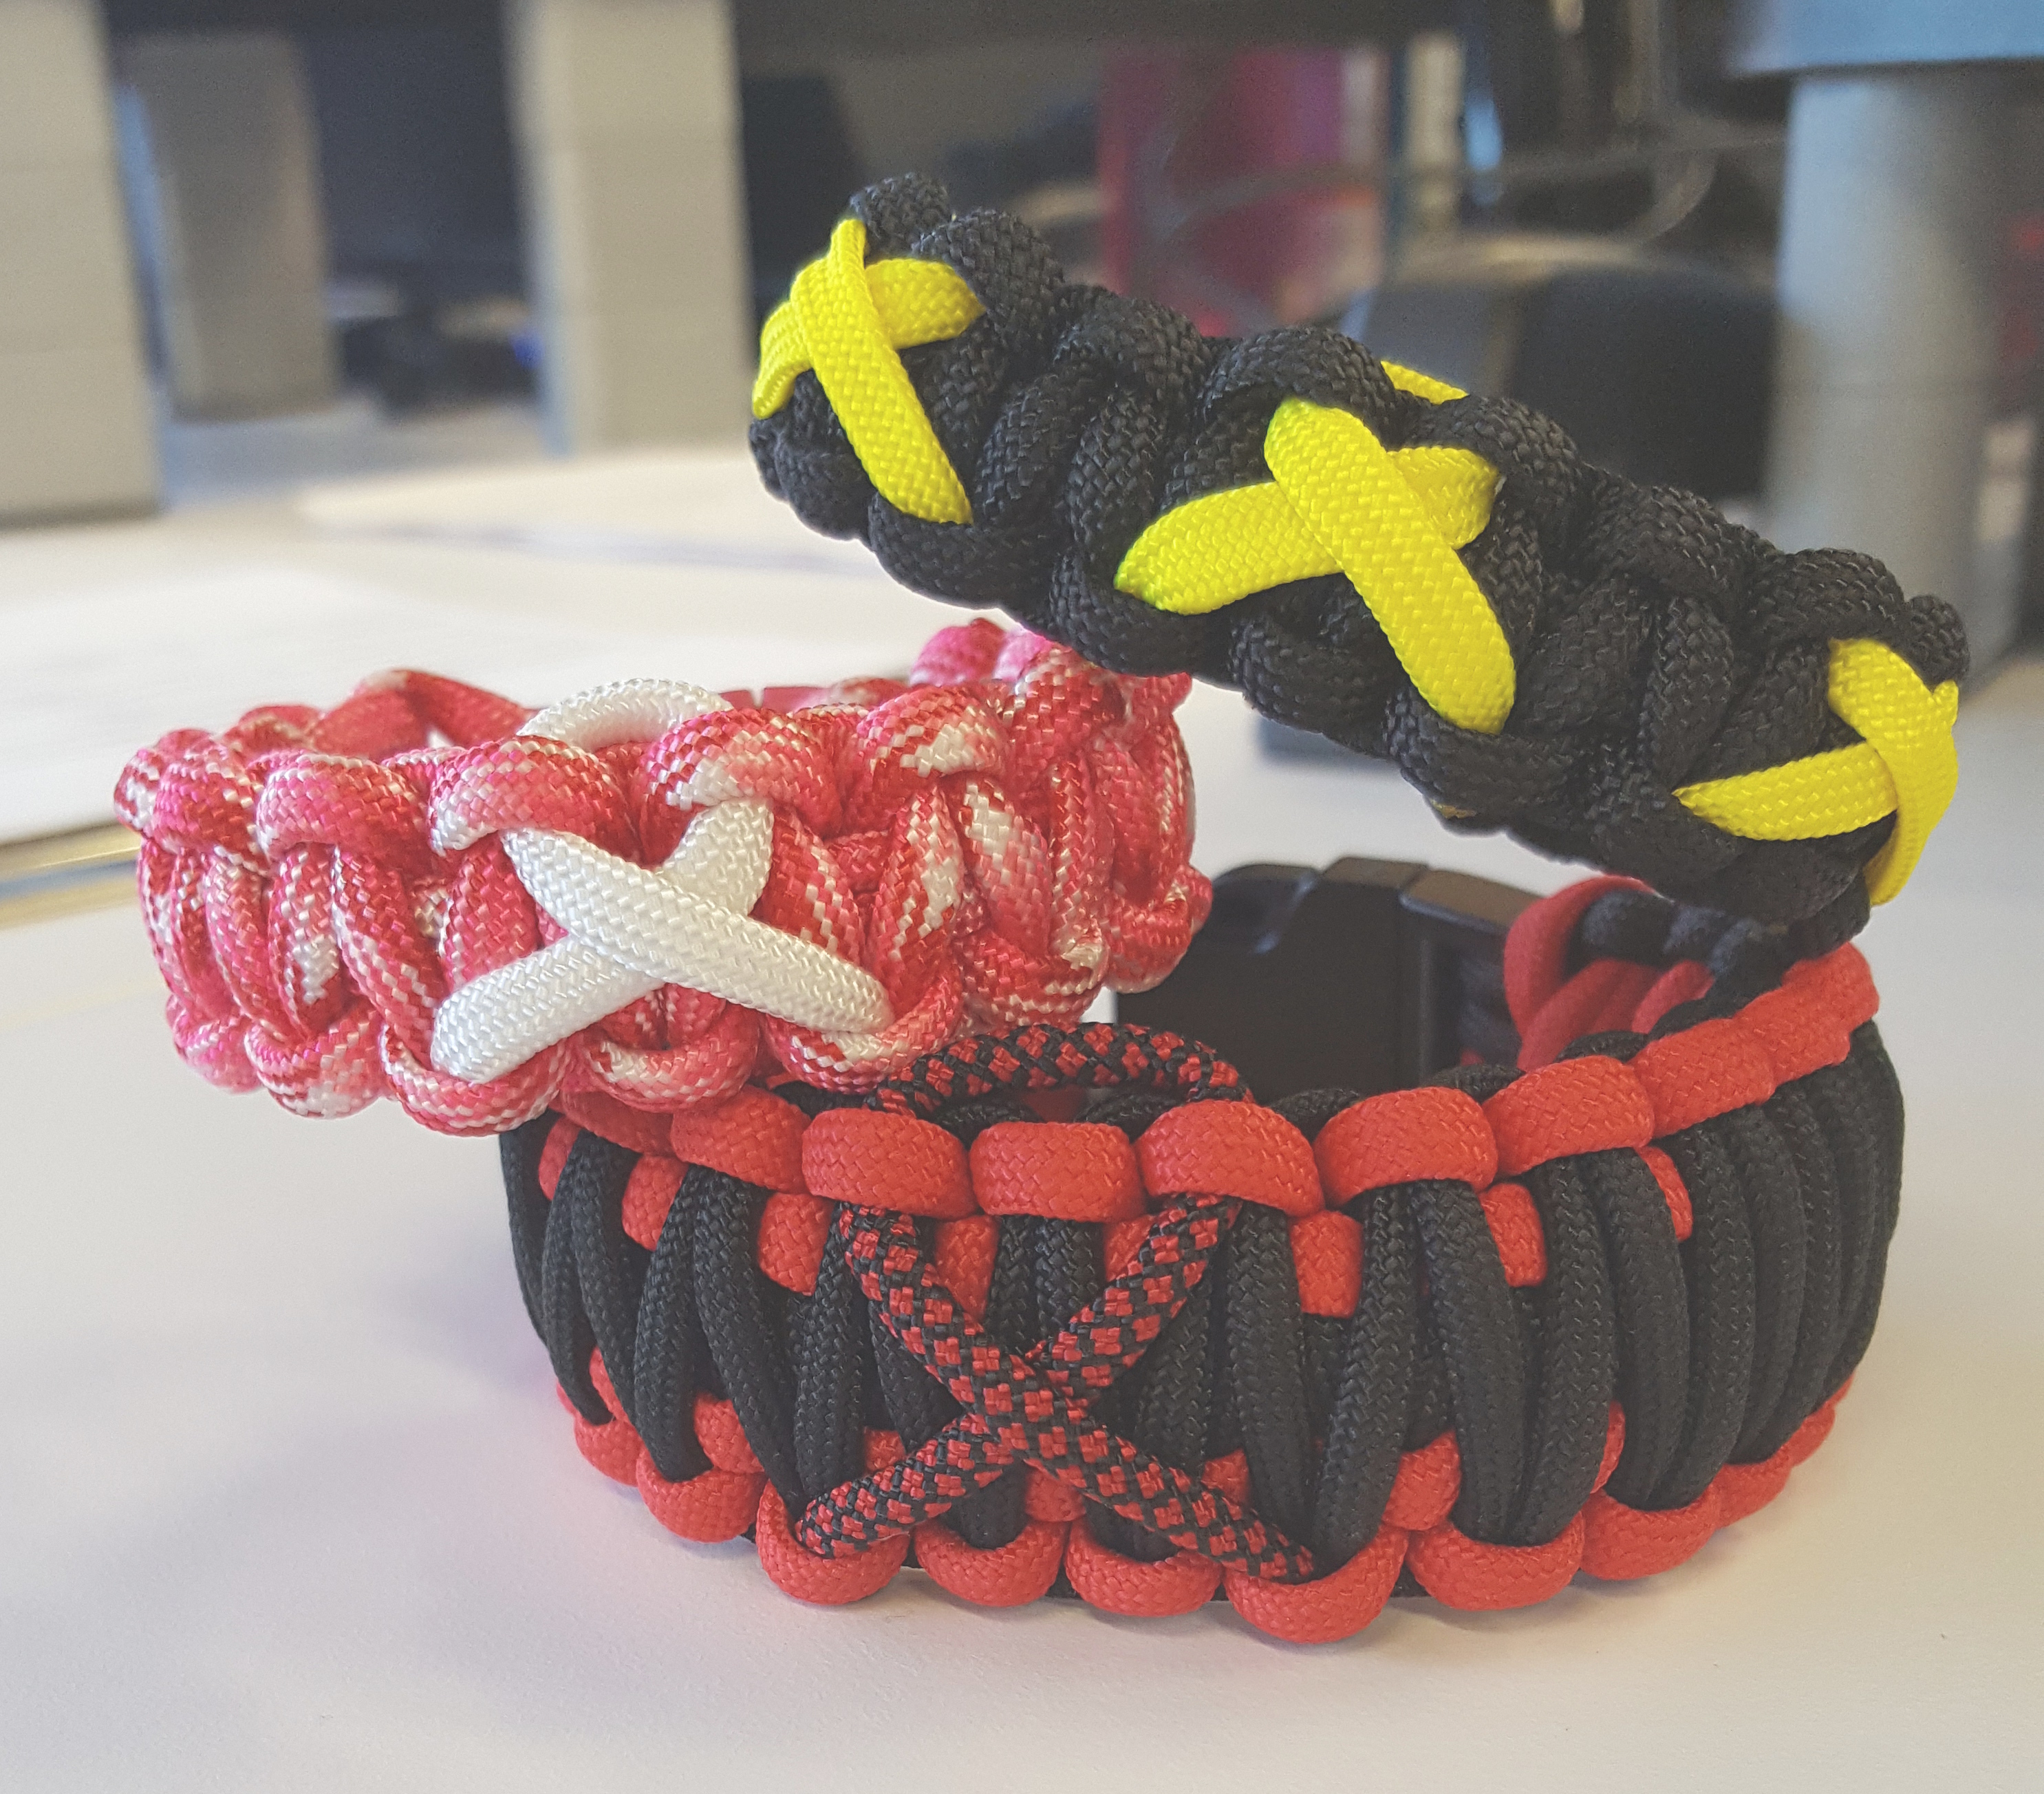 Completed paracord awareness bracelet